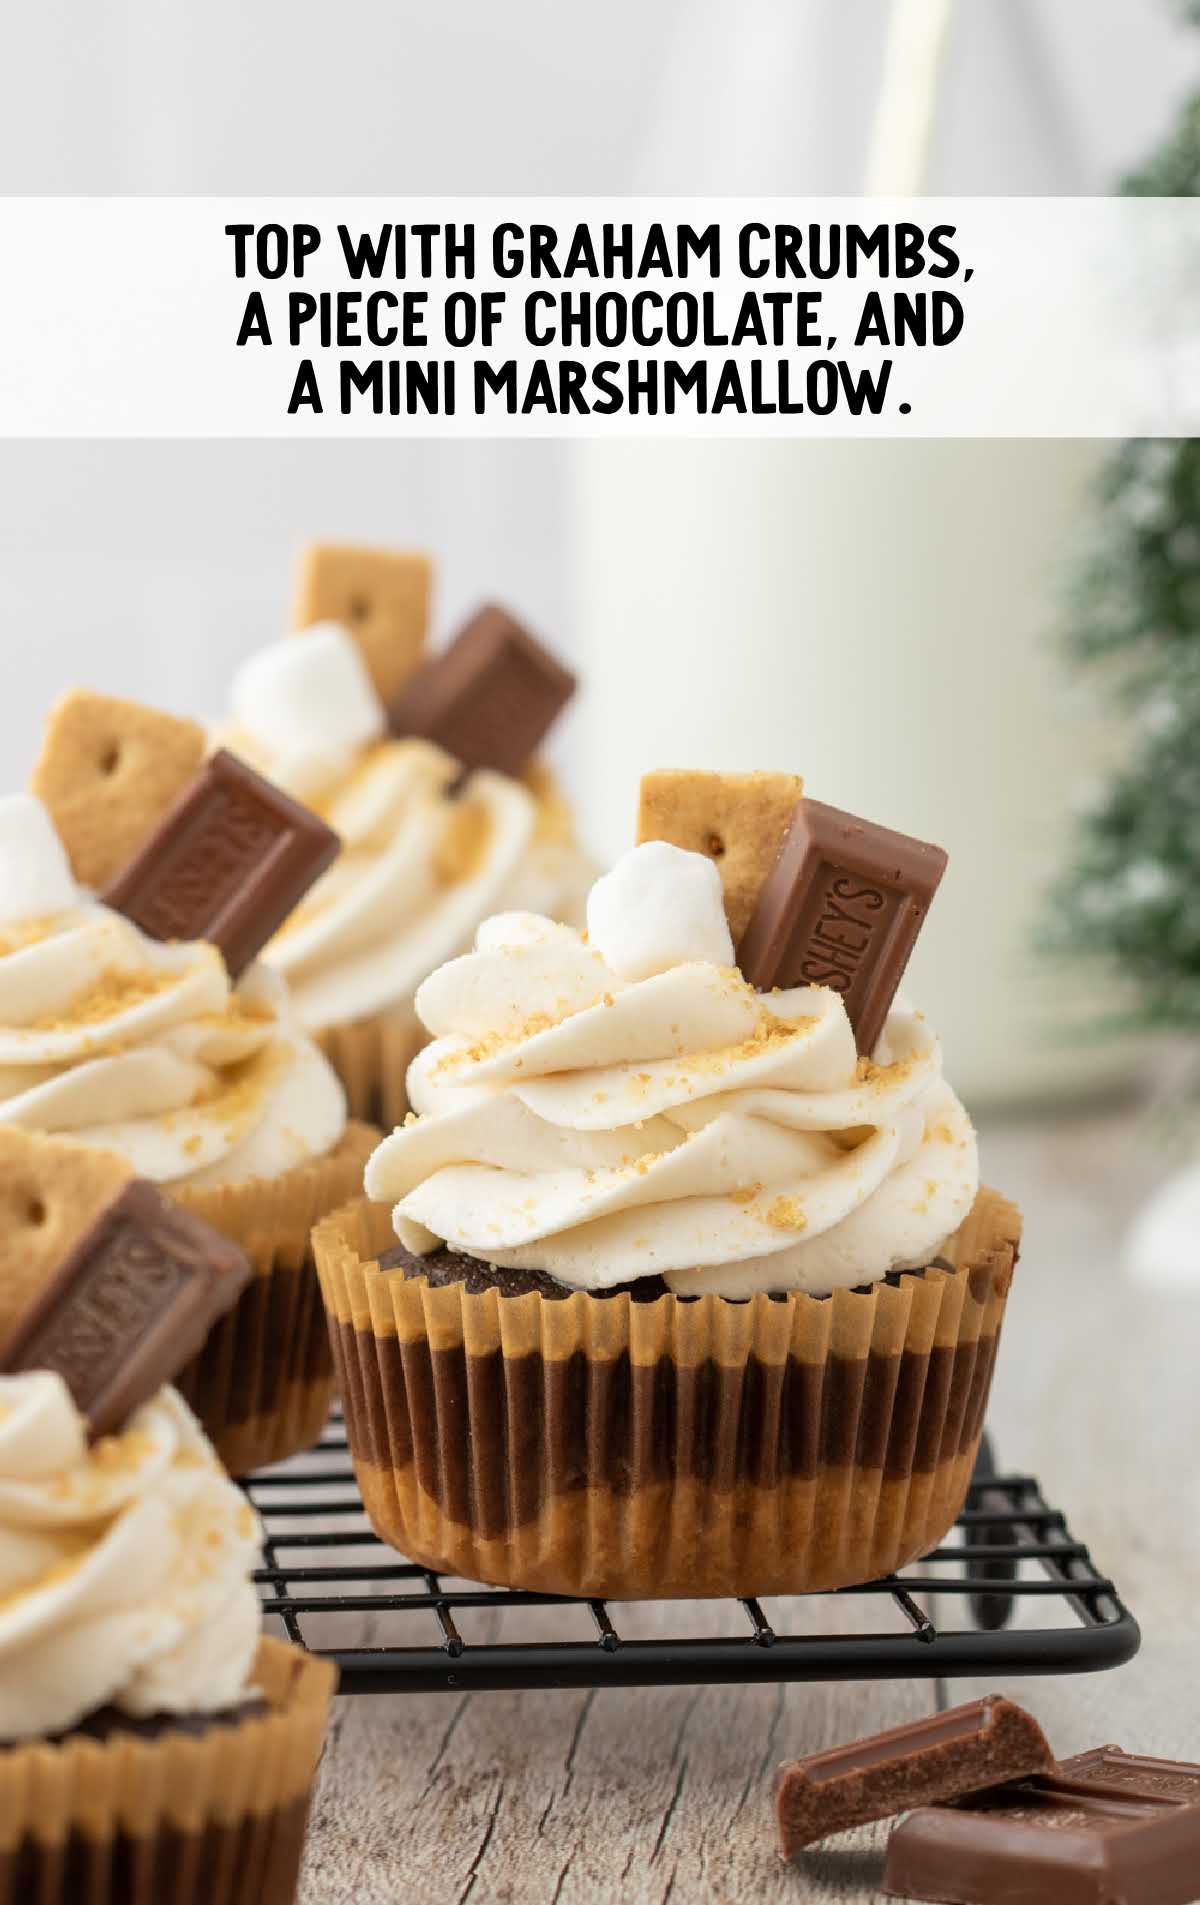 graham crumbs, chocolate, and mini marshmallow topped on top of the cupcake